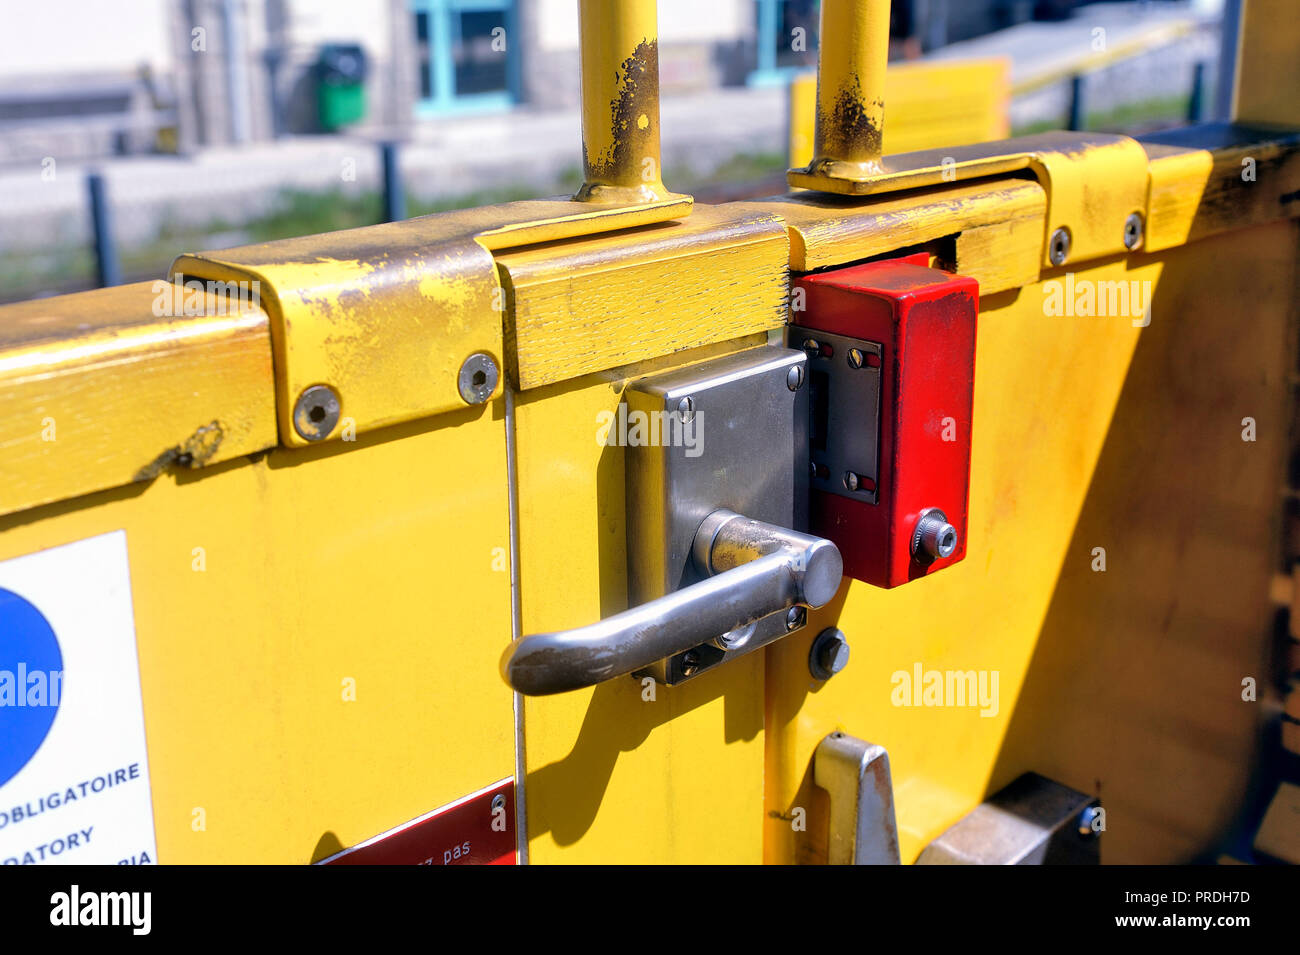 Door opening system of the little yellow train in close-up Stock Photo